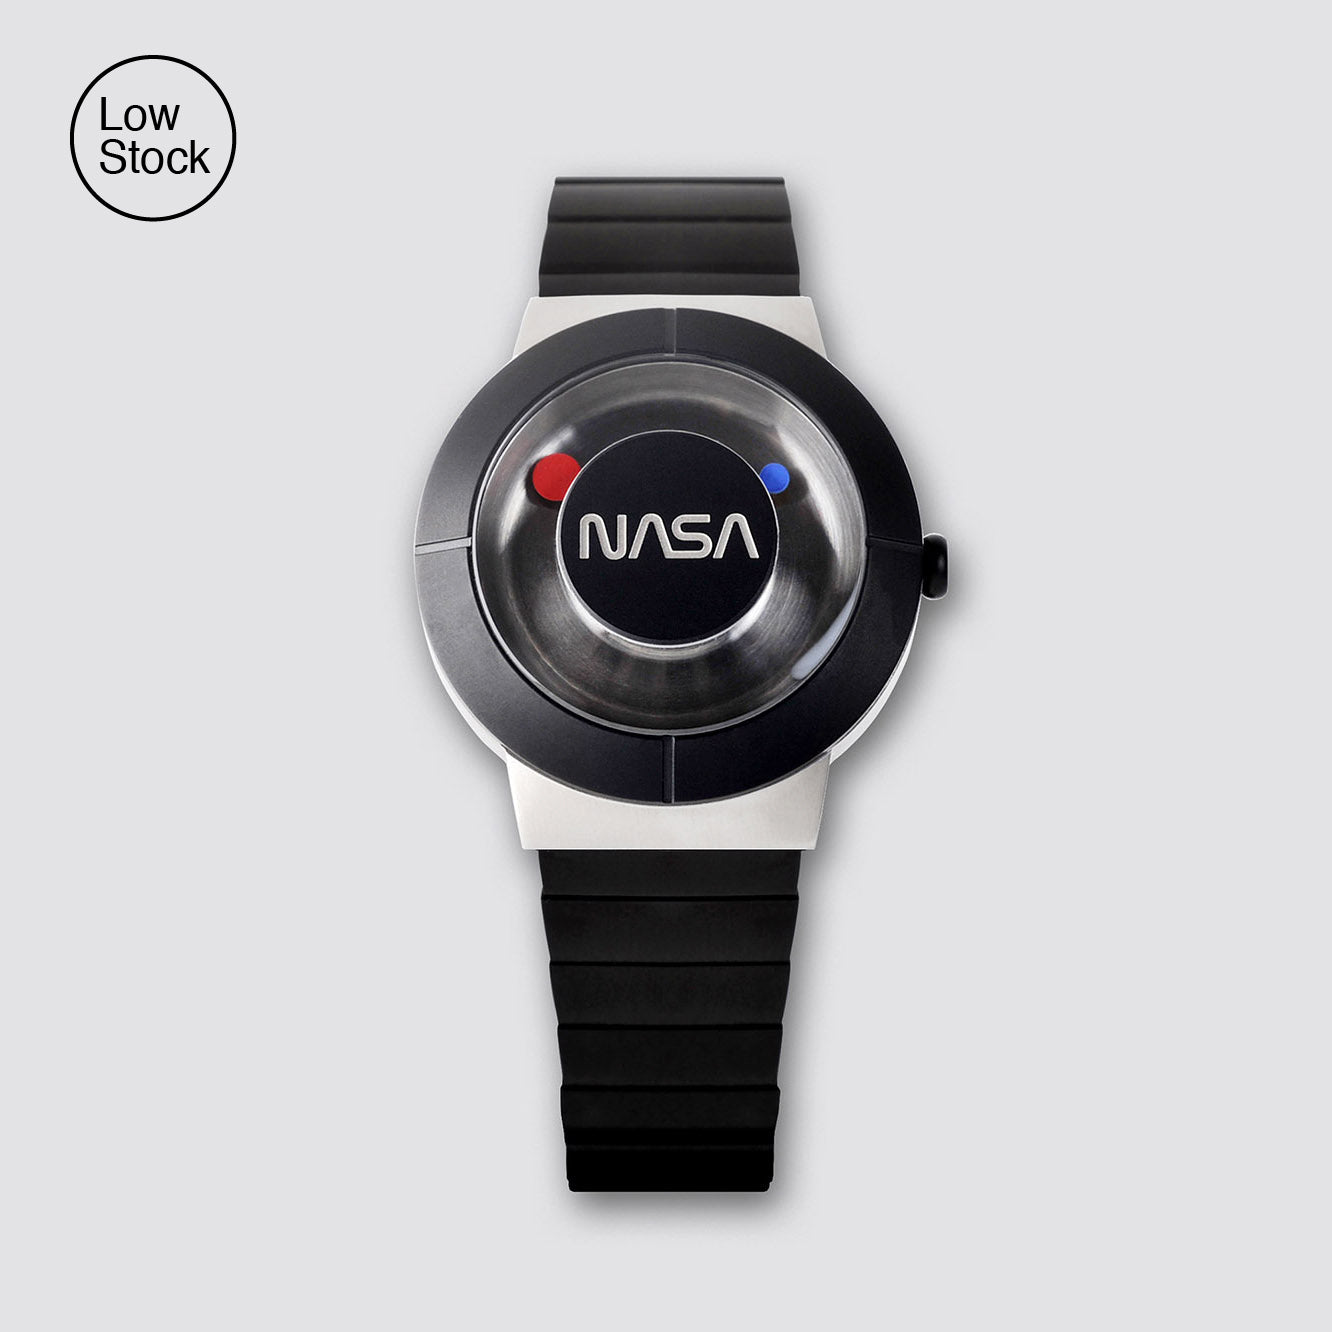 A space watch, inspired by Space itself, “Father of the NASA Design Program” Richard Danne designs his One and Only Space Watch, as homage to his long and fruitful relationship with the NASA family.